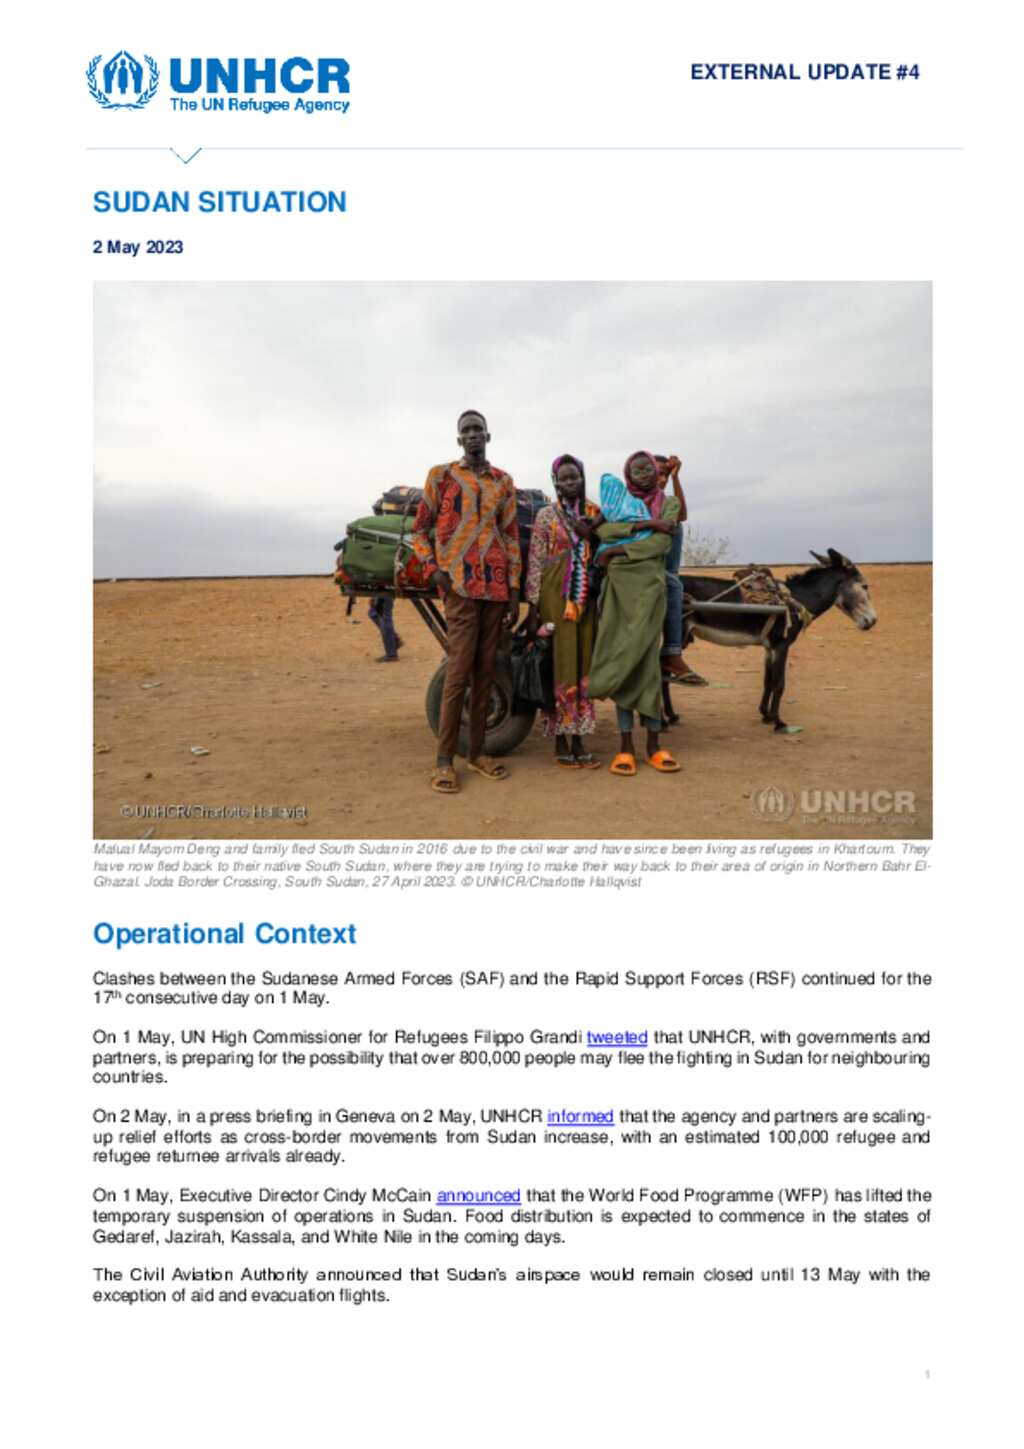 Document - Sudan Situation - UNHCR External Update #4 - 2 May 2023